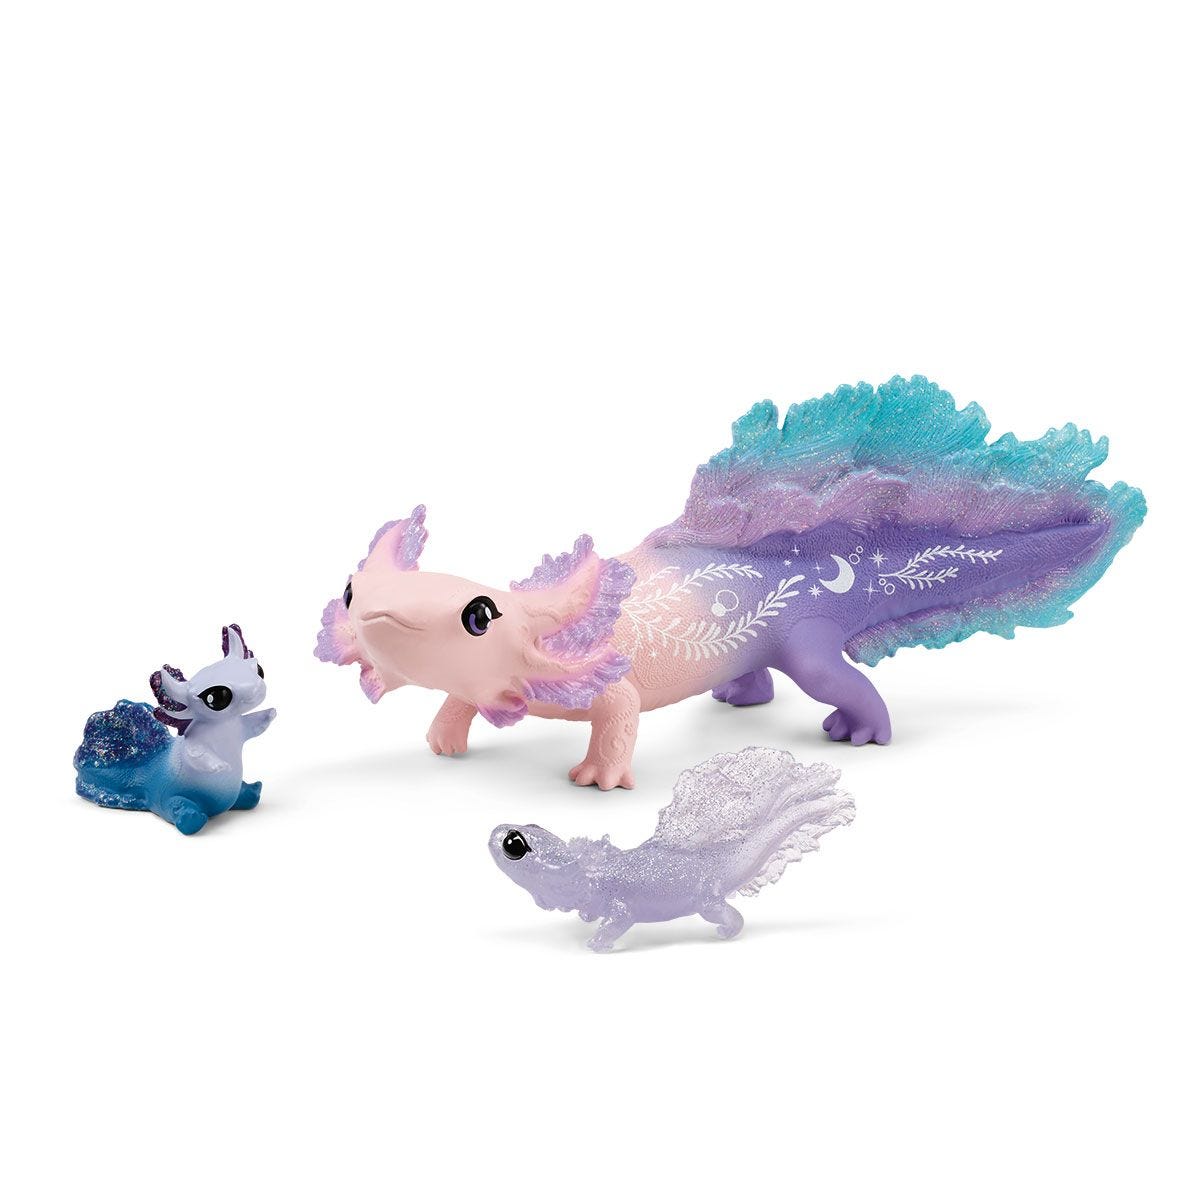 Axolotl Discovery Set by Schleich #42628